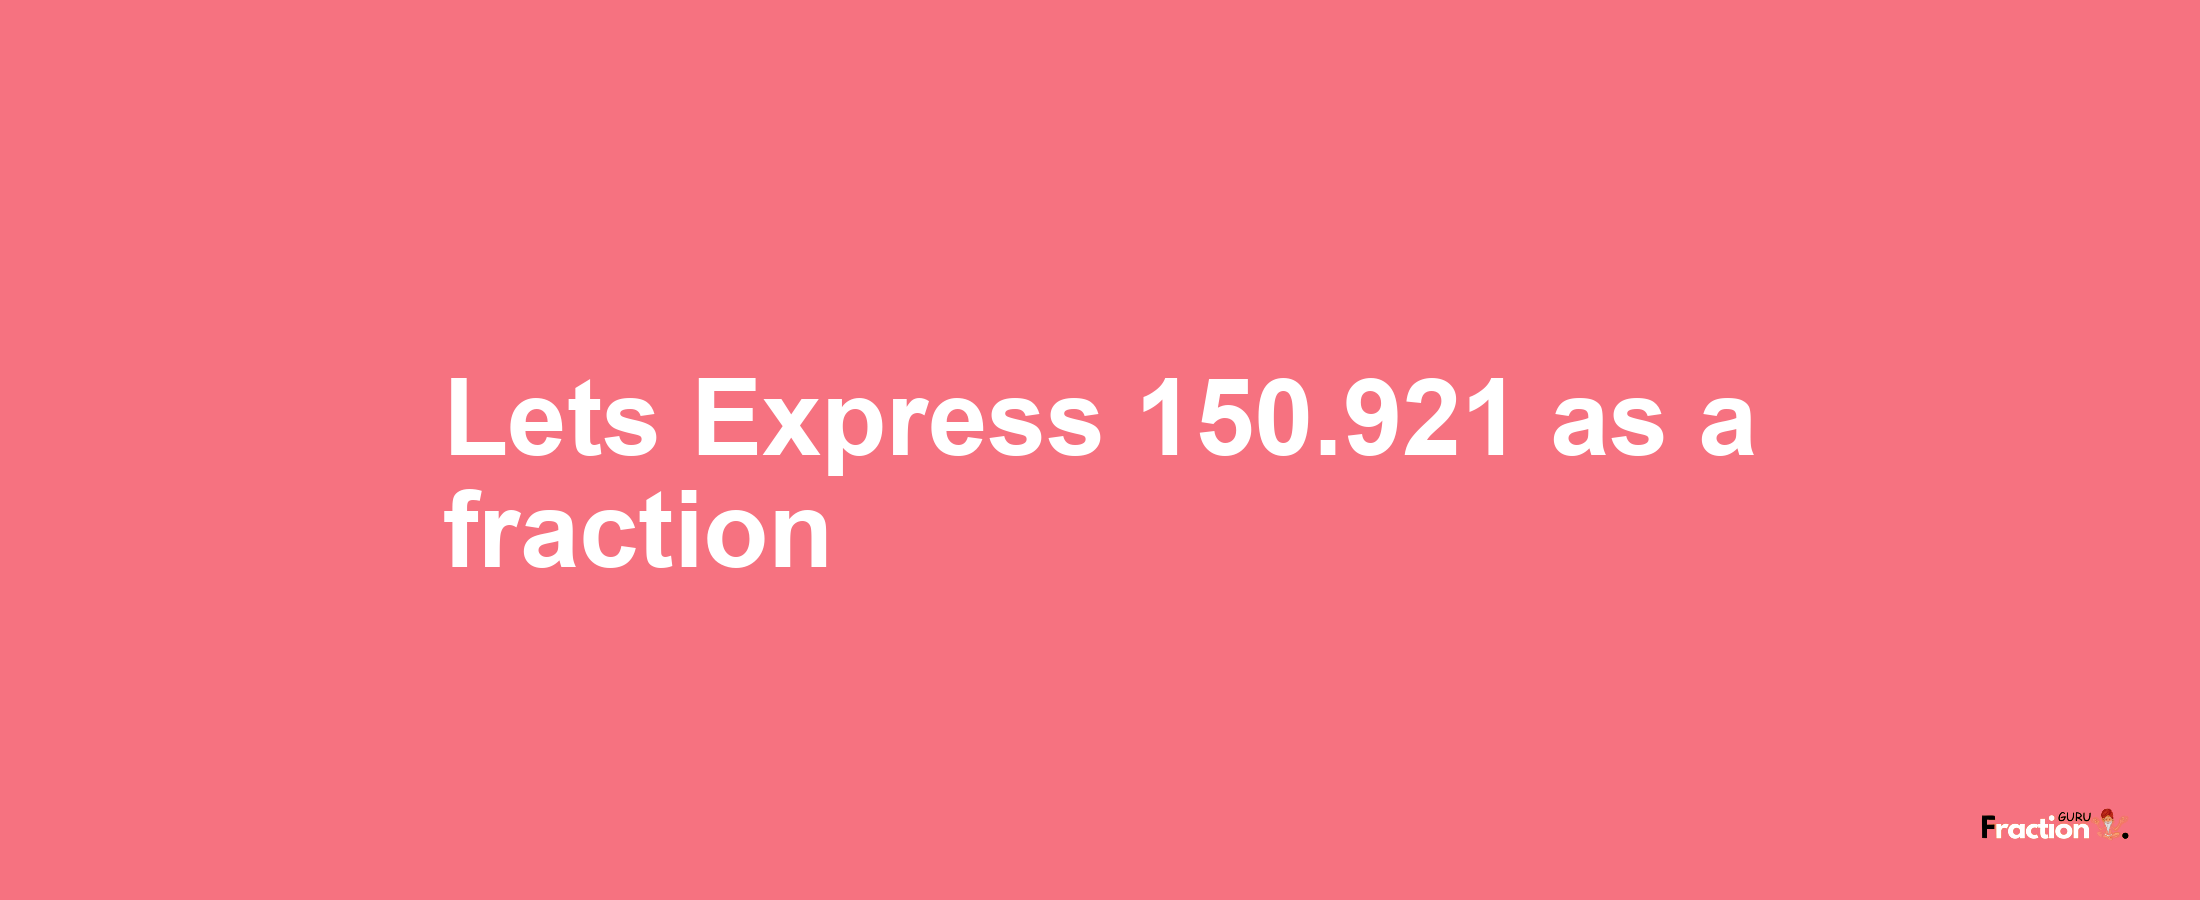 Lets Express 150.921 as afraction